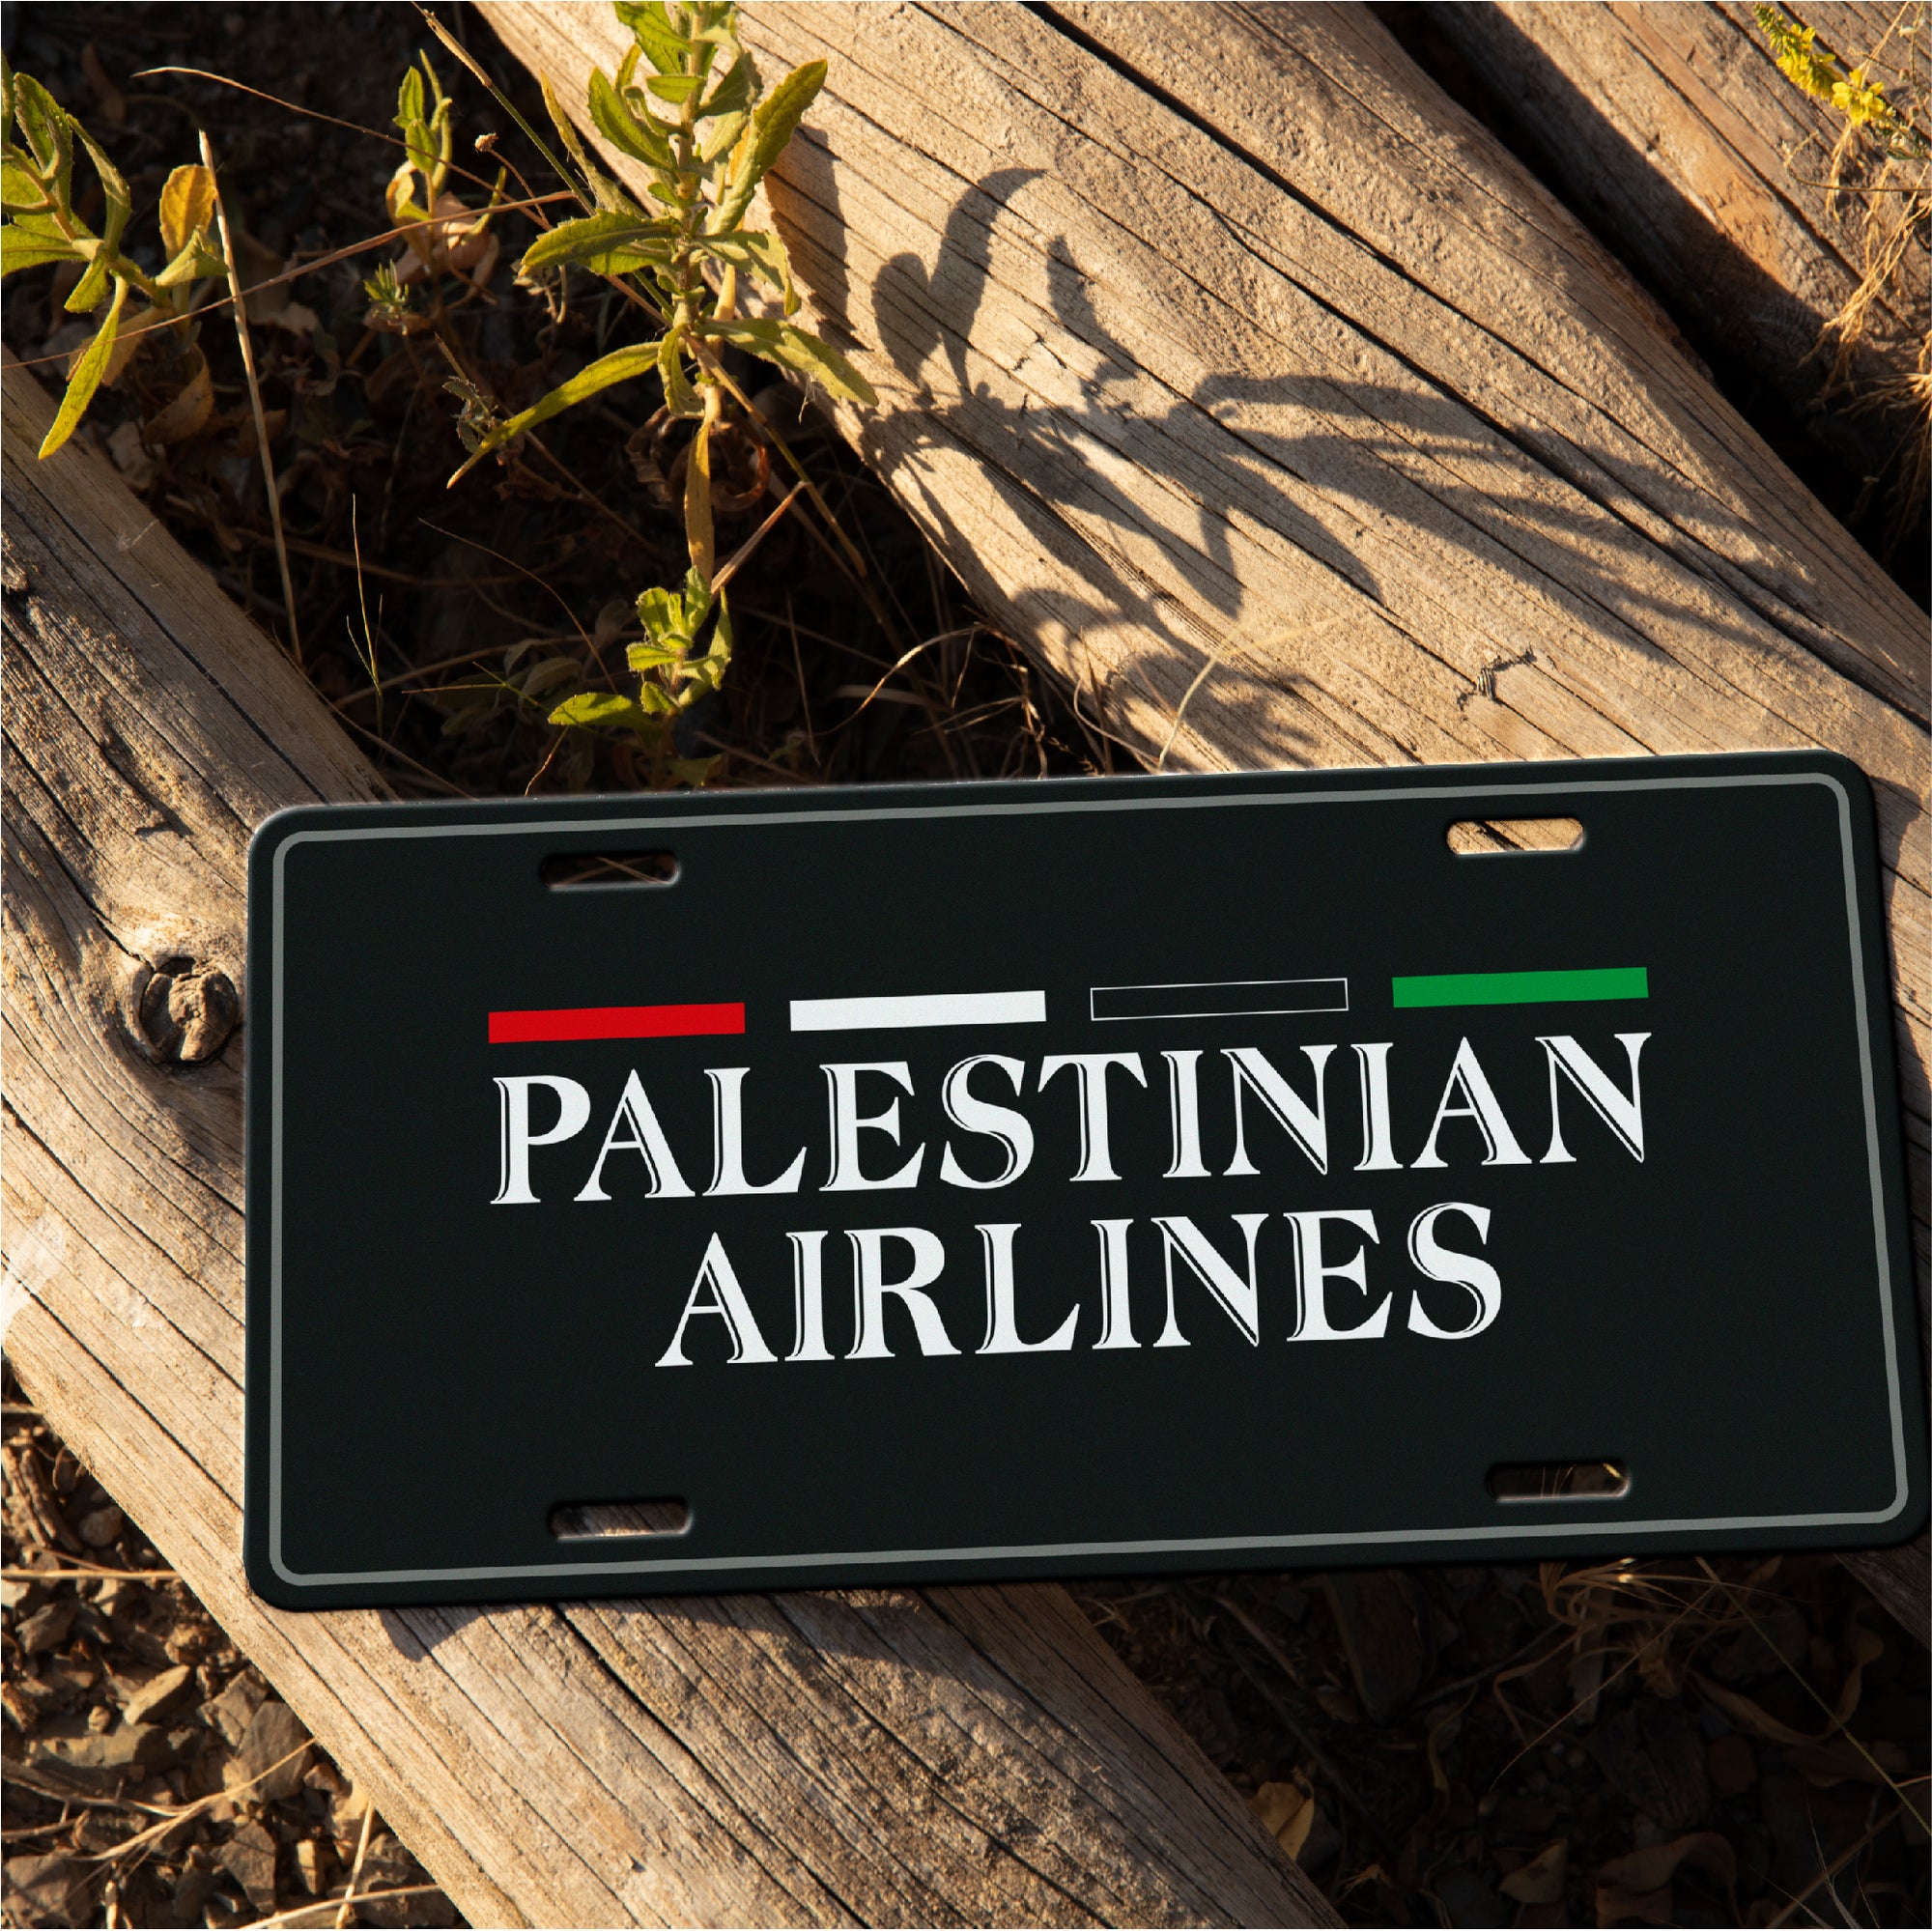 Car Plates - palestinian airlines